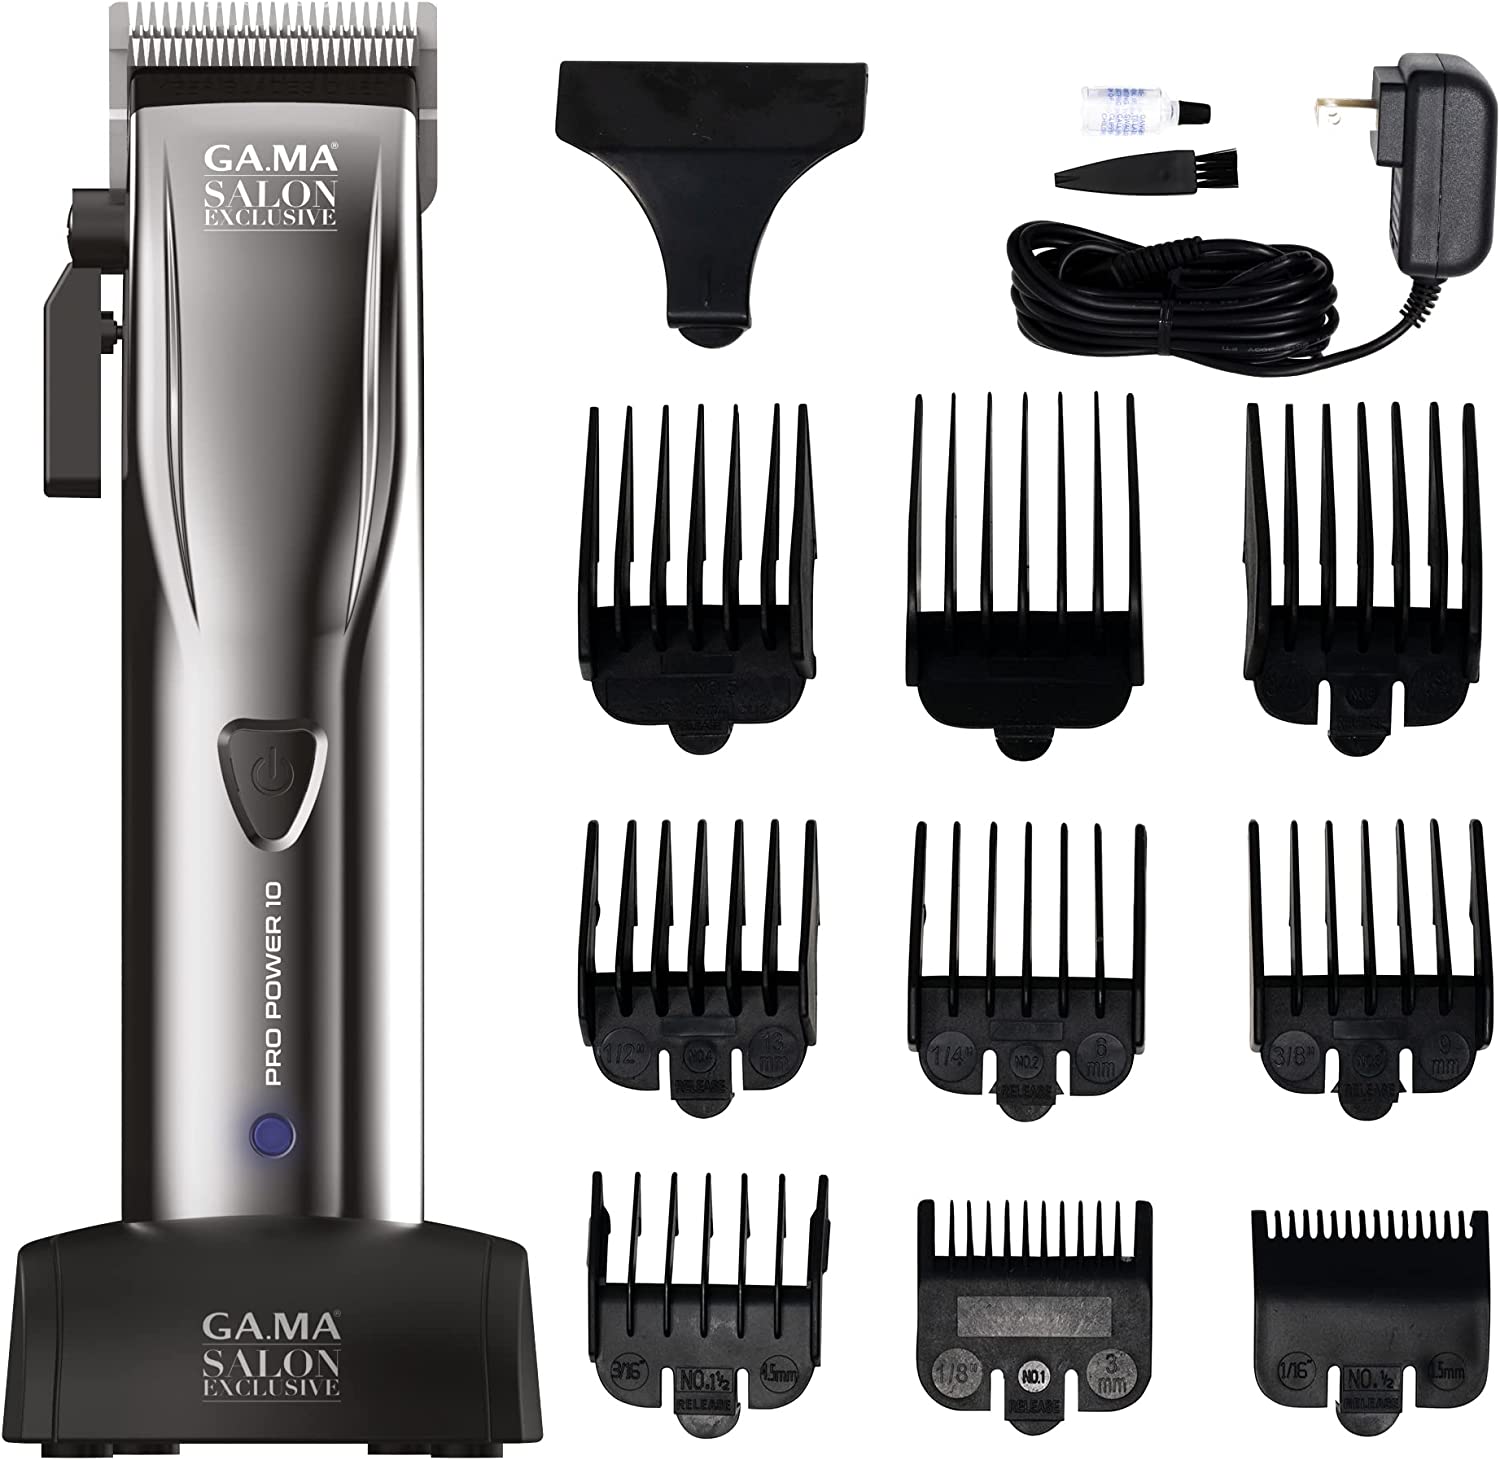 GAMA Salon Exclusive Pro Power 10 Professional Hair Clippers Cord or Cordless Function - 1